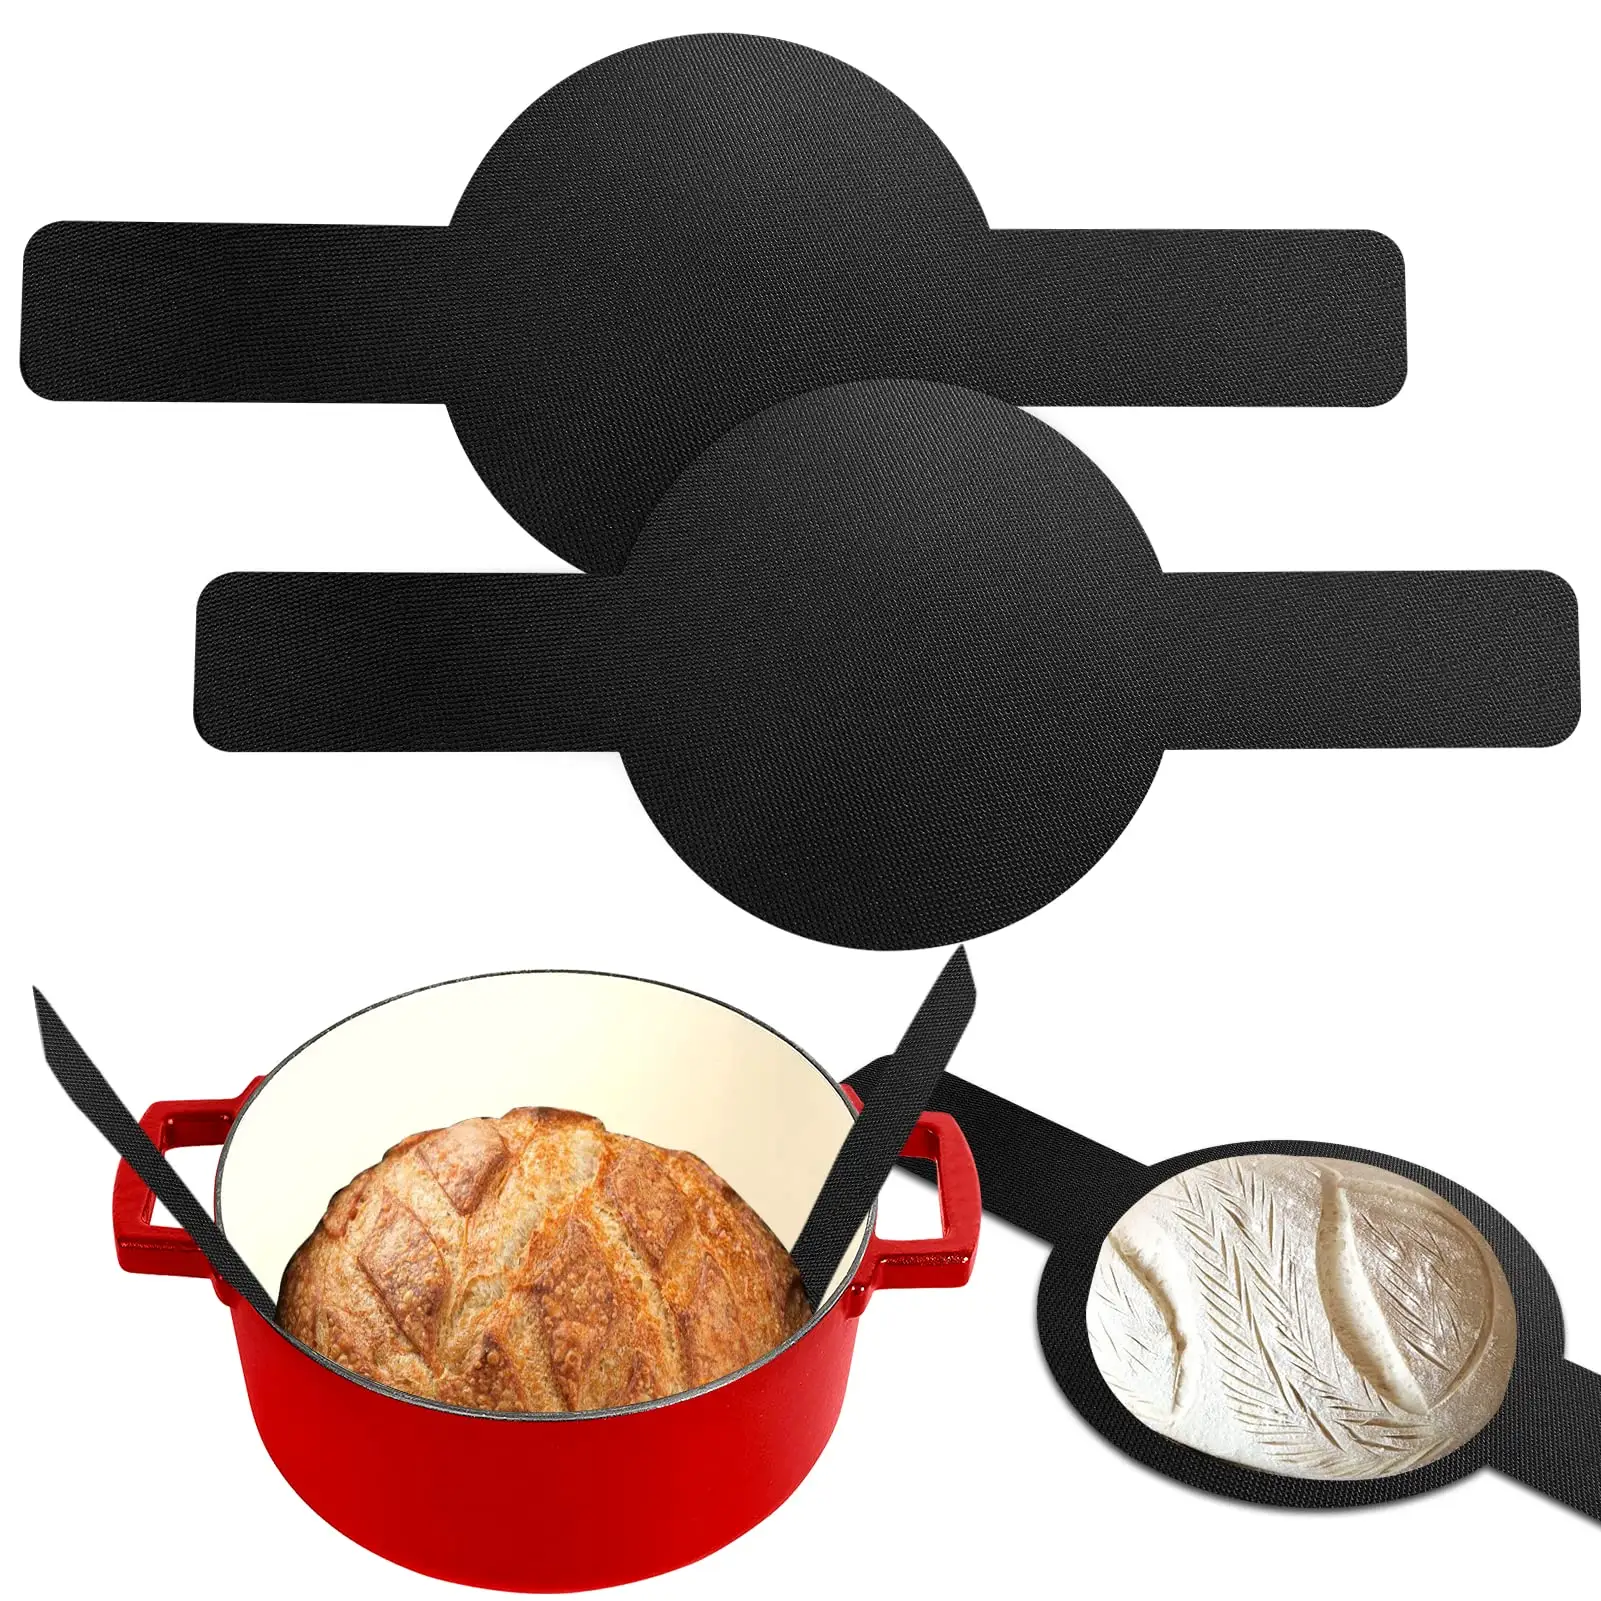 2Pcs Baking Mat for Dutch Oven Bread Baking, Reusable Non-stick Bread Sling,Bread Making Tools and Supplies